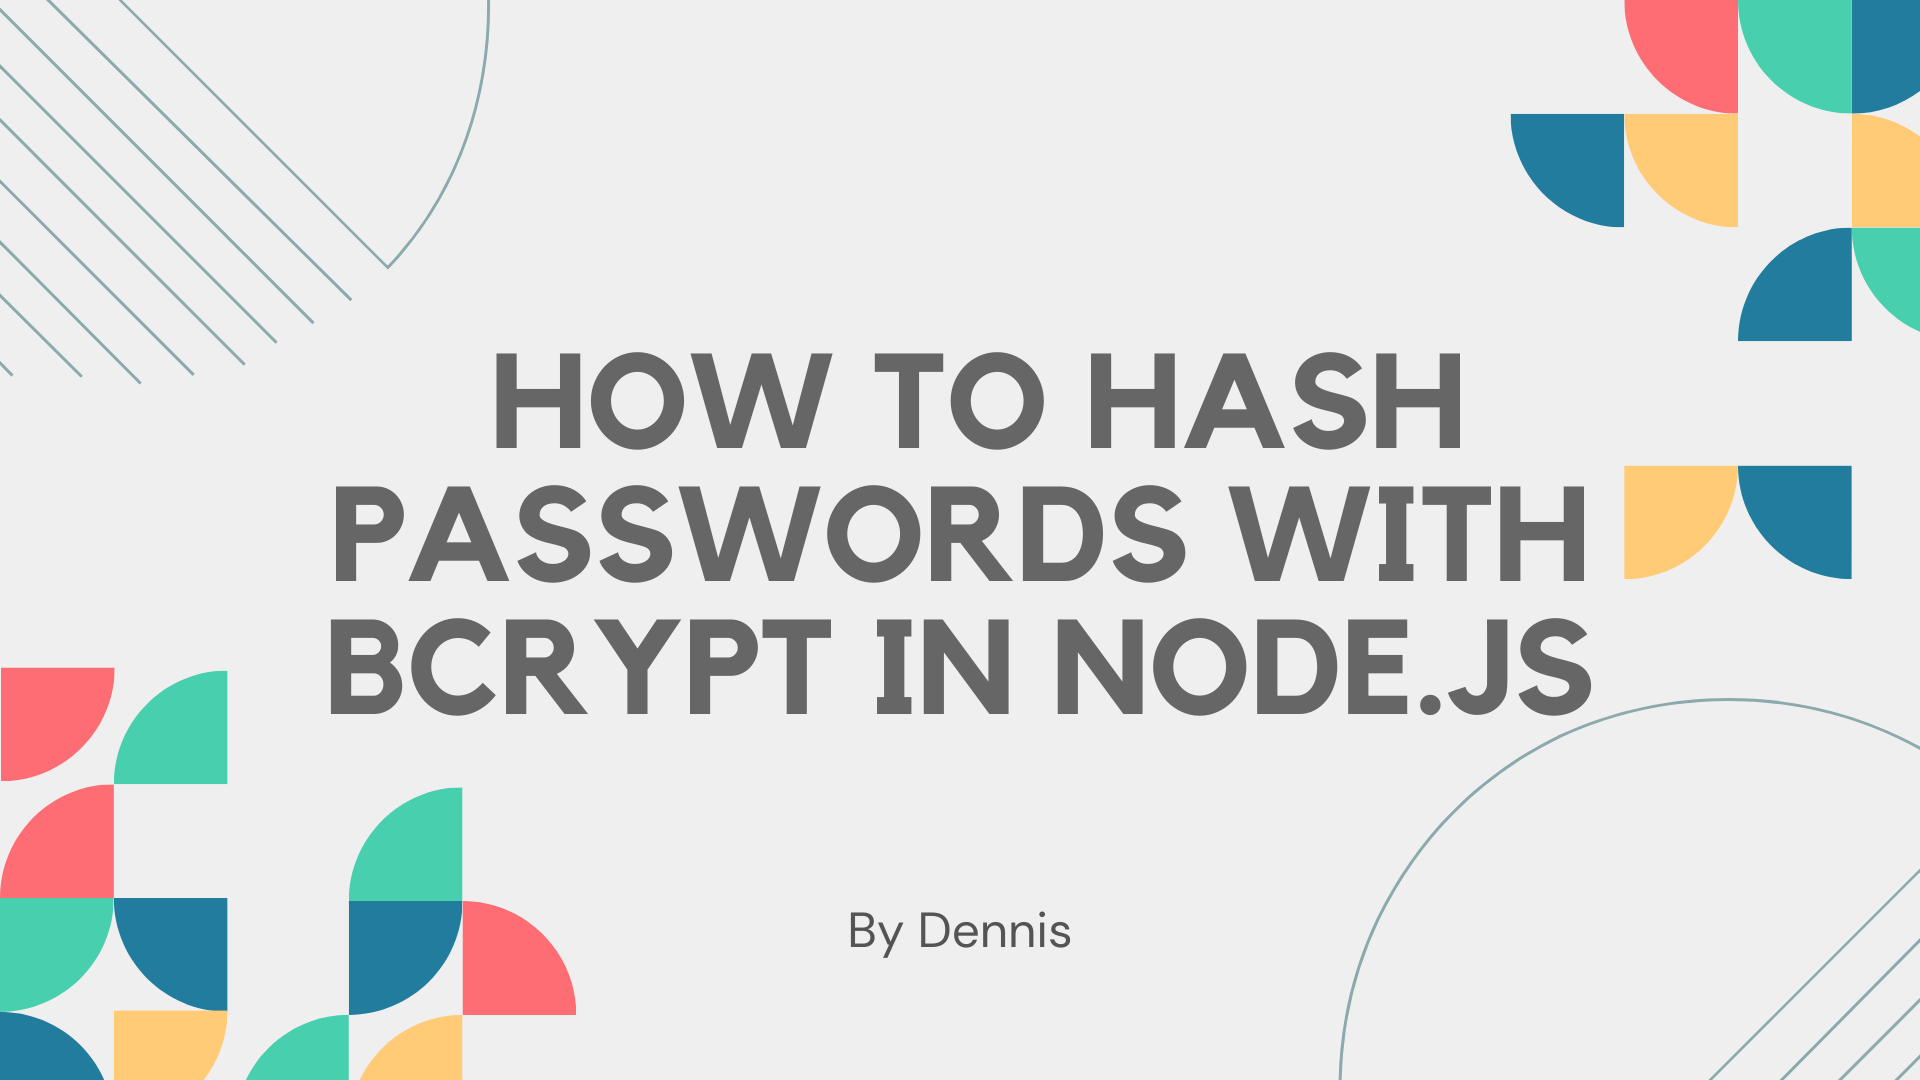 How to Hash Passwords with bcrypt in Node.js